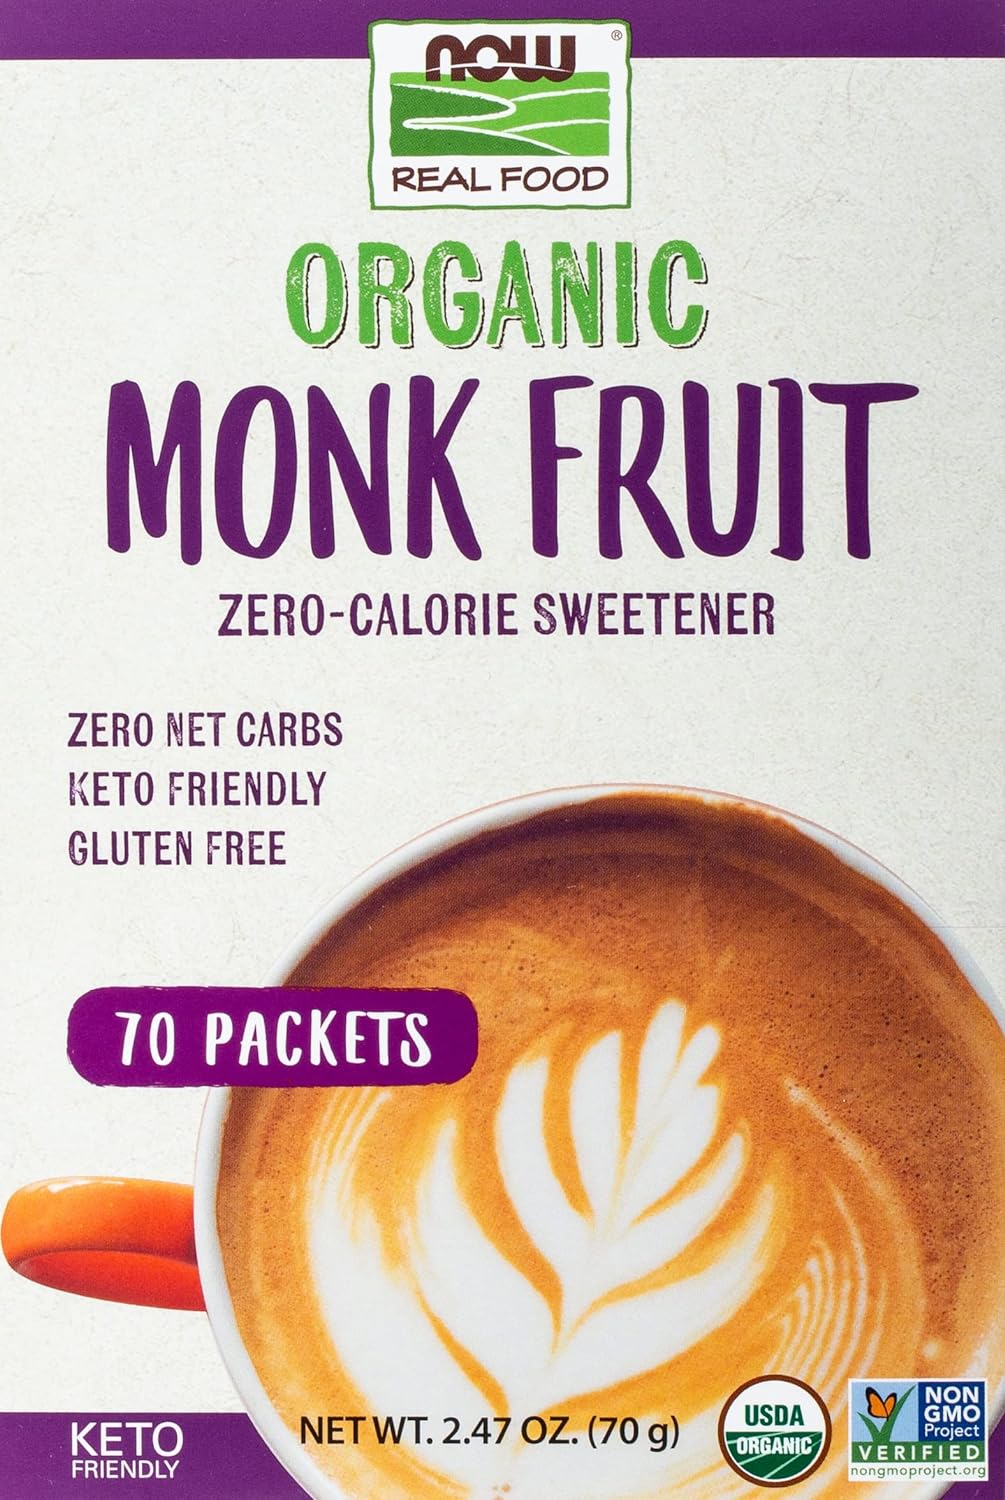 NOW Foods Monk Fruit Organic, 70 Packet